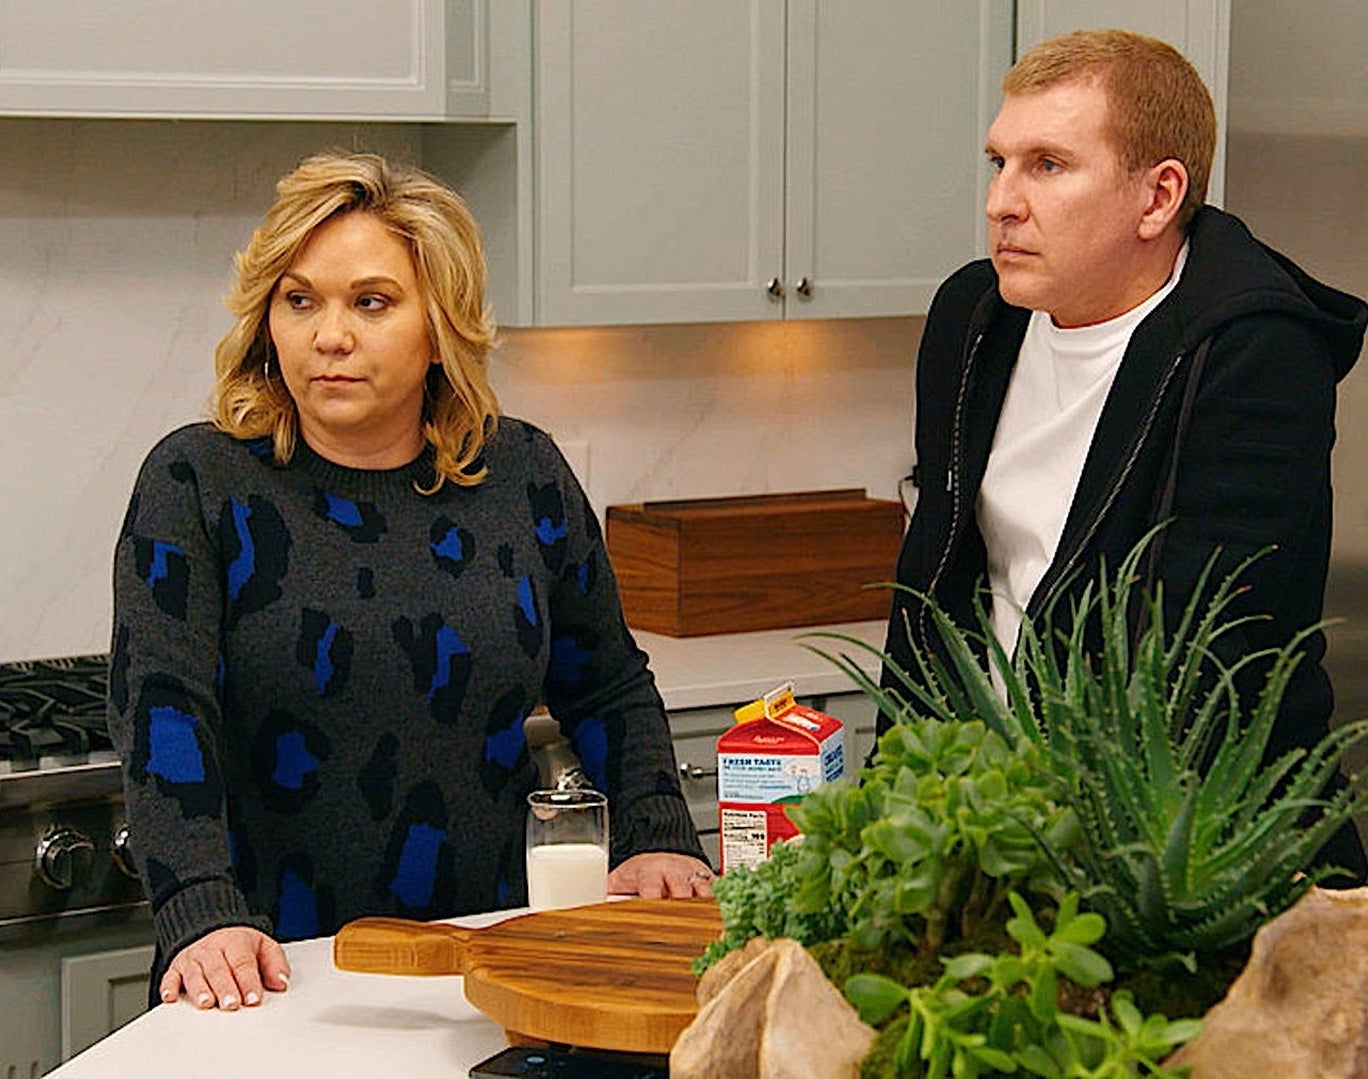 Julie and Todd Chrisley are seated at a kitchen counter with a thoughtful expression, surrounded by everyday kitchen items